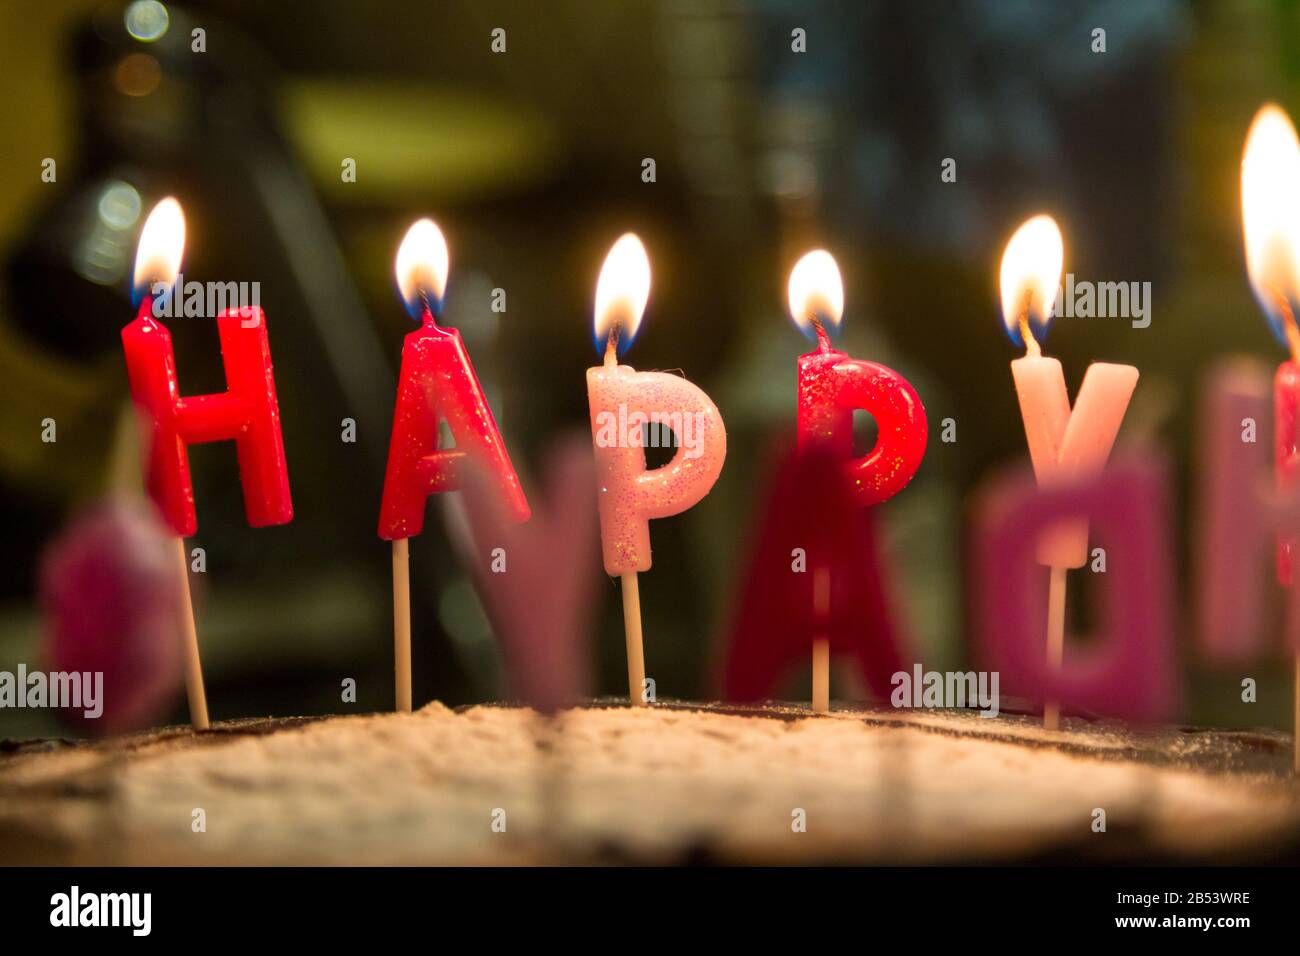 Happy Birthday Cake with Letters Candles with Fire Stock Image - Image of  anniversary, celebrate: 259548229